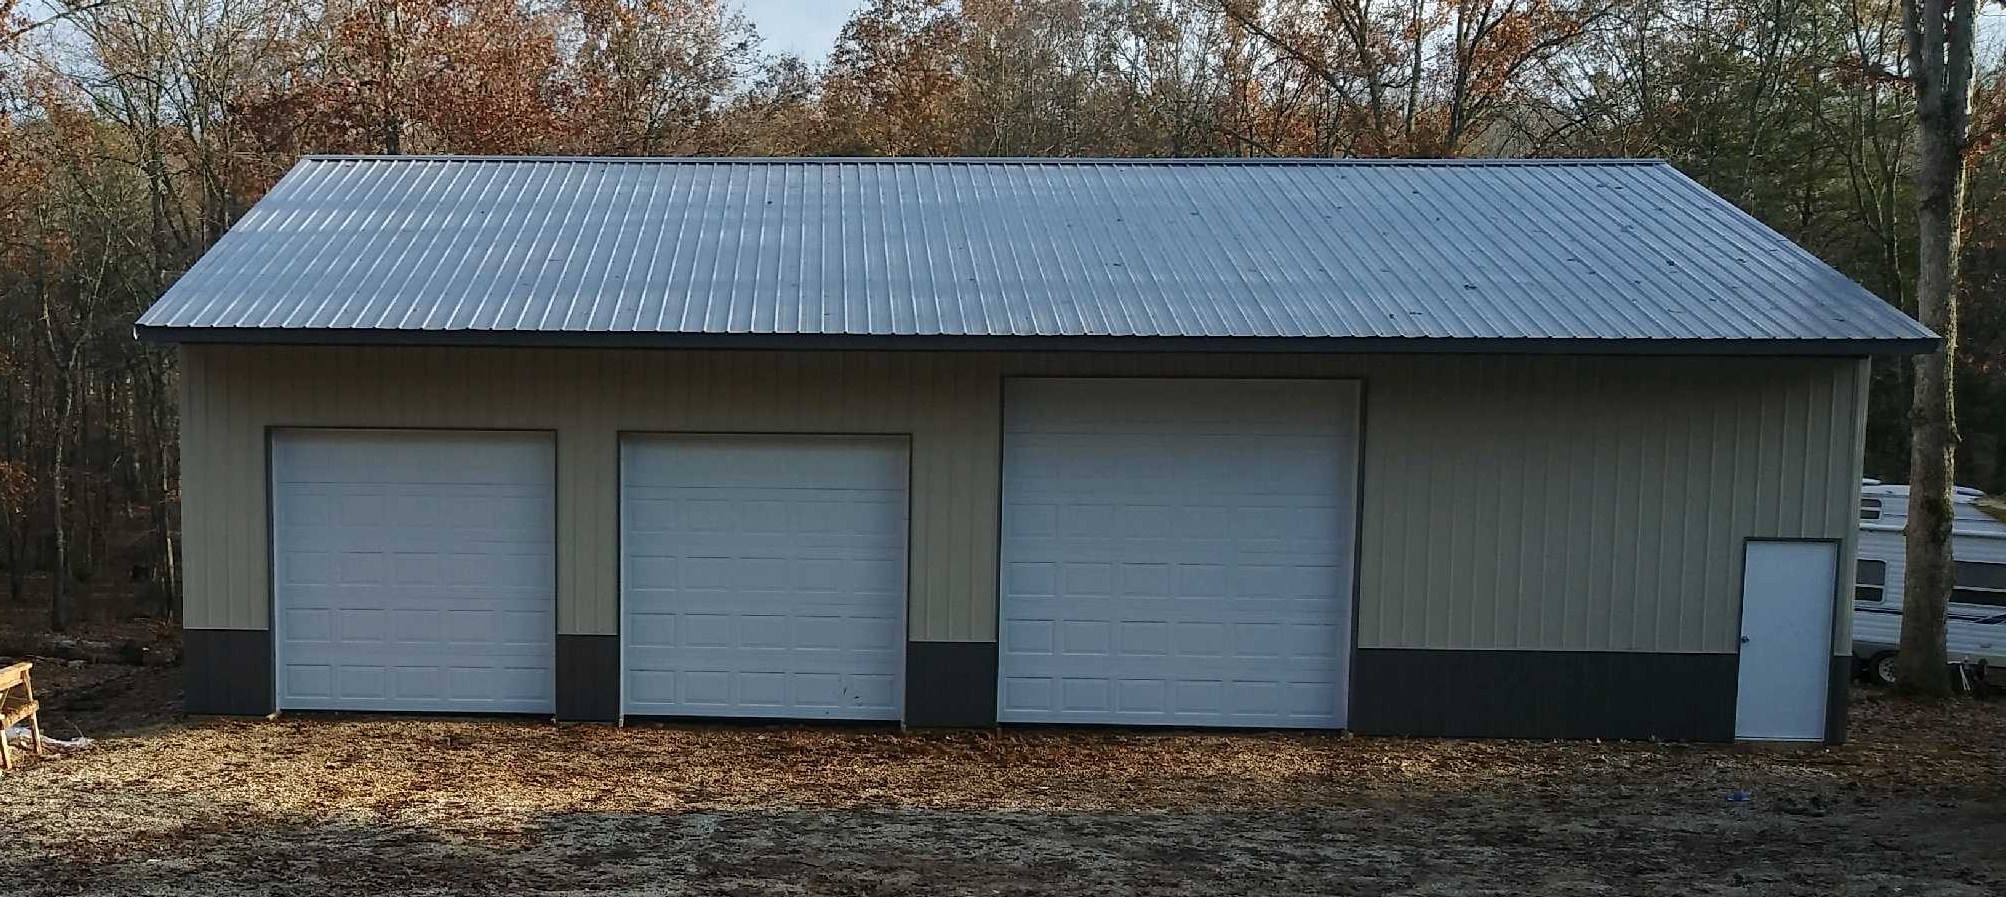 Benefits of Pole Barns for Storage